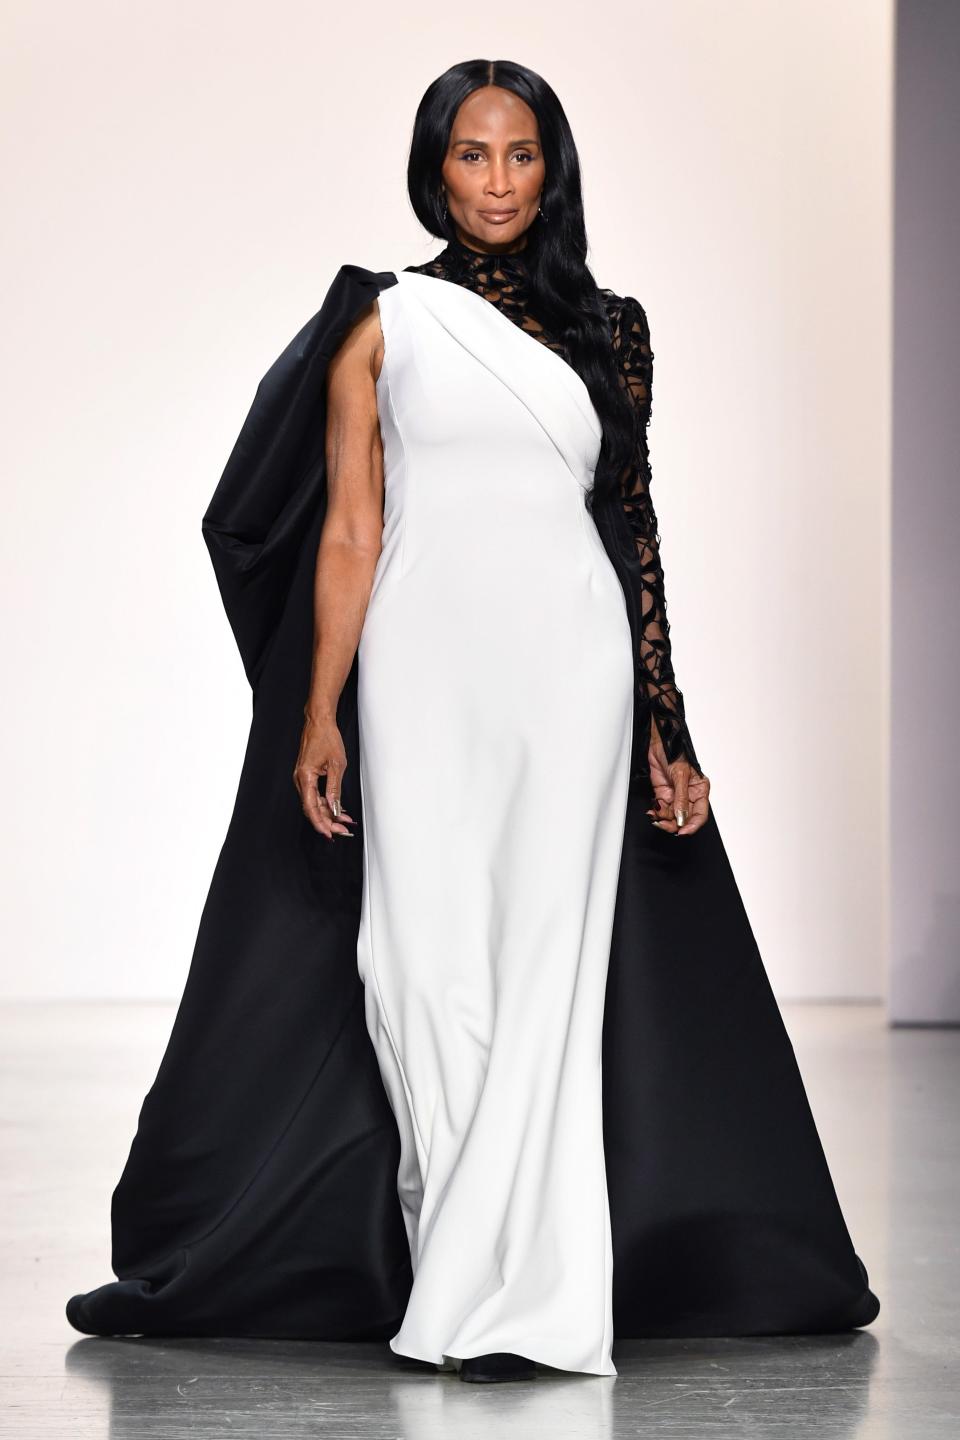 Beverly Johnson walks the runway for Bibhu Mohapatra during New York Fashion Week at Spring Studios on Feb. 15, 2022, in New York City.